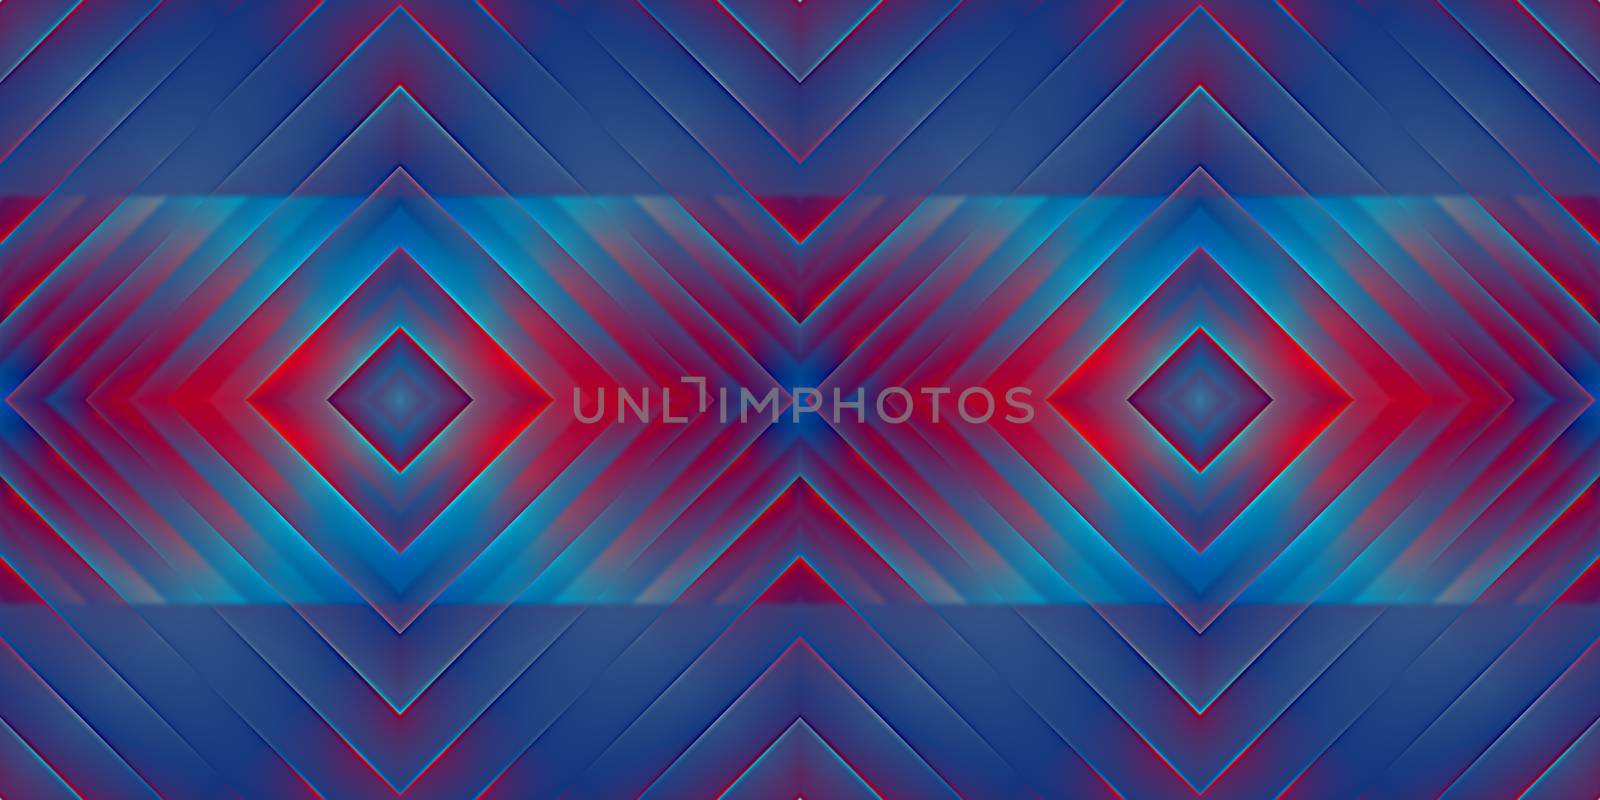 Dark Blue Red Seamless Psy Pattern Background. Bright Surrealism Texture. Fractal Geometric Backdrop.